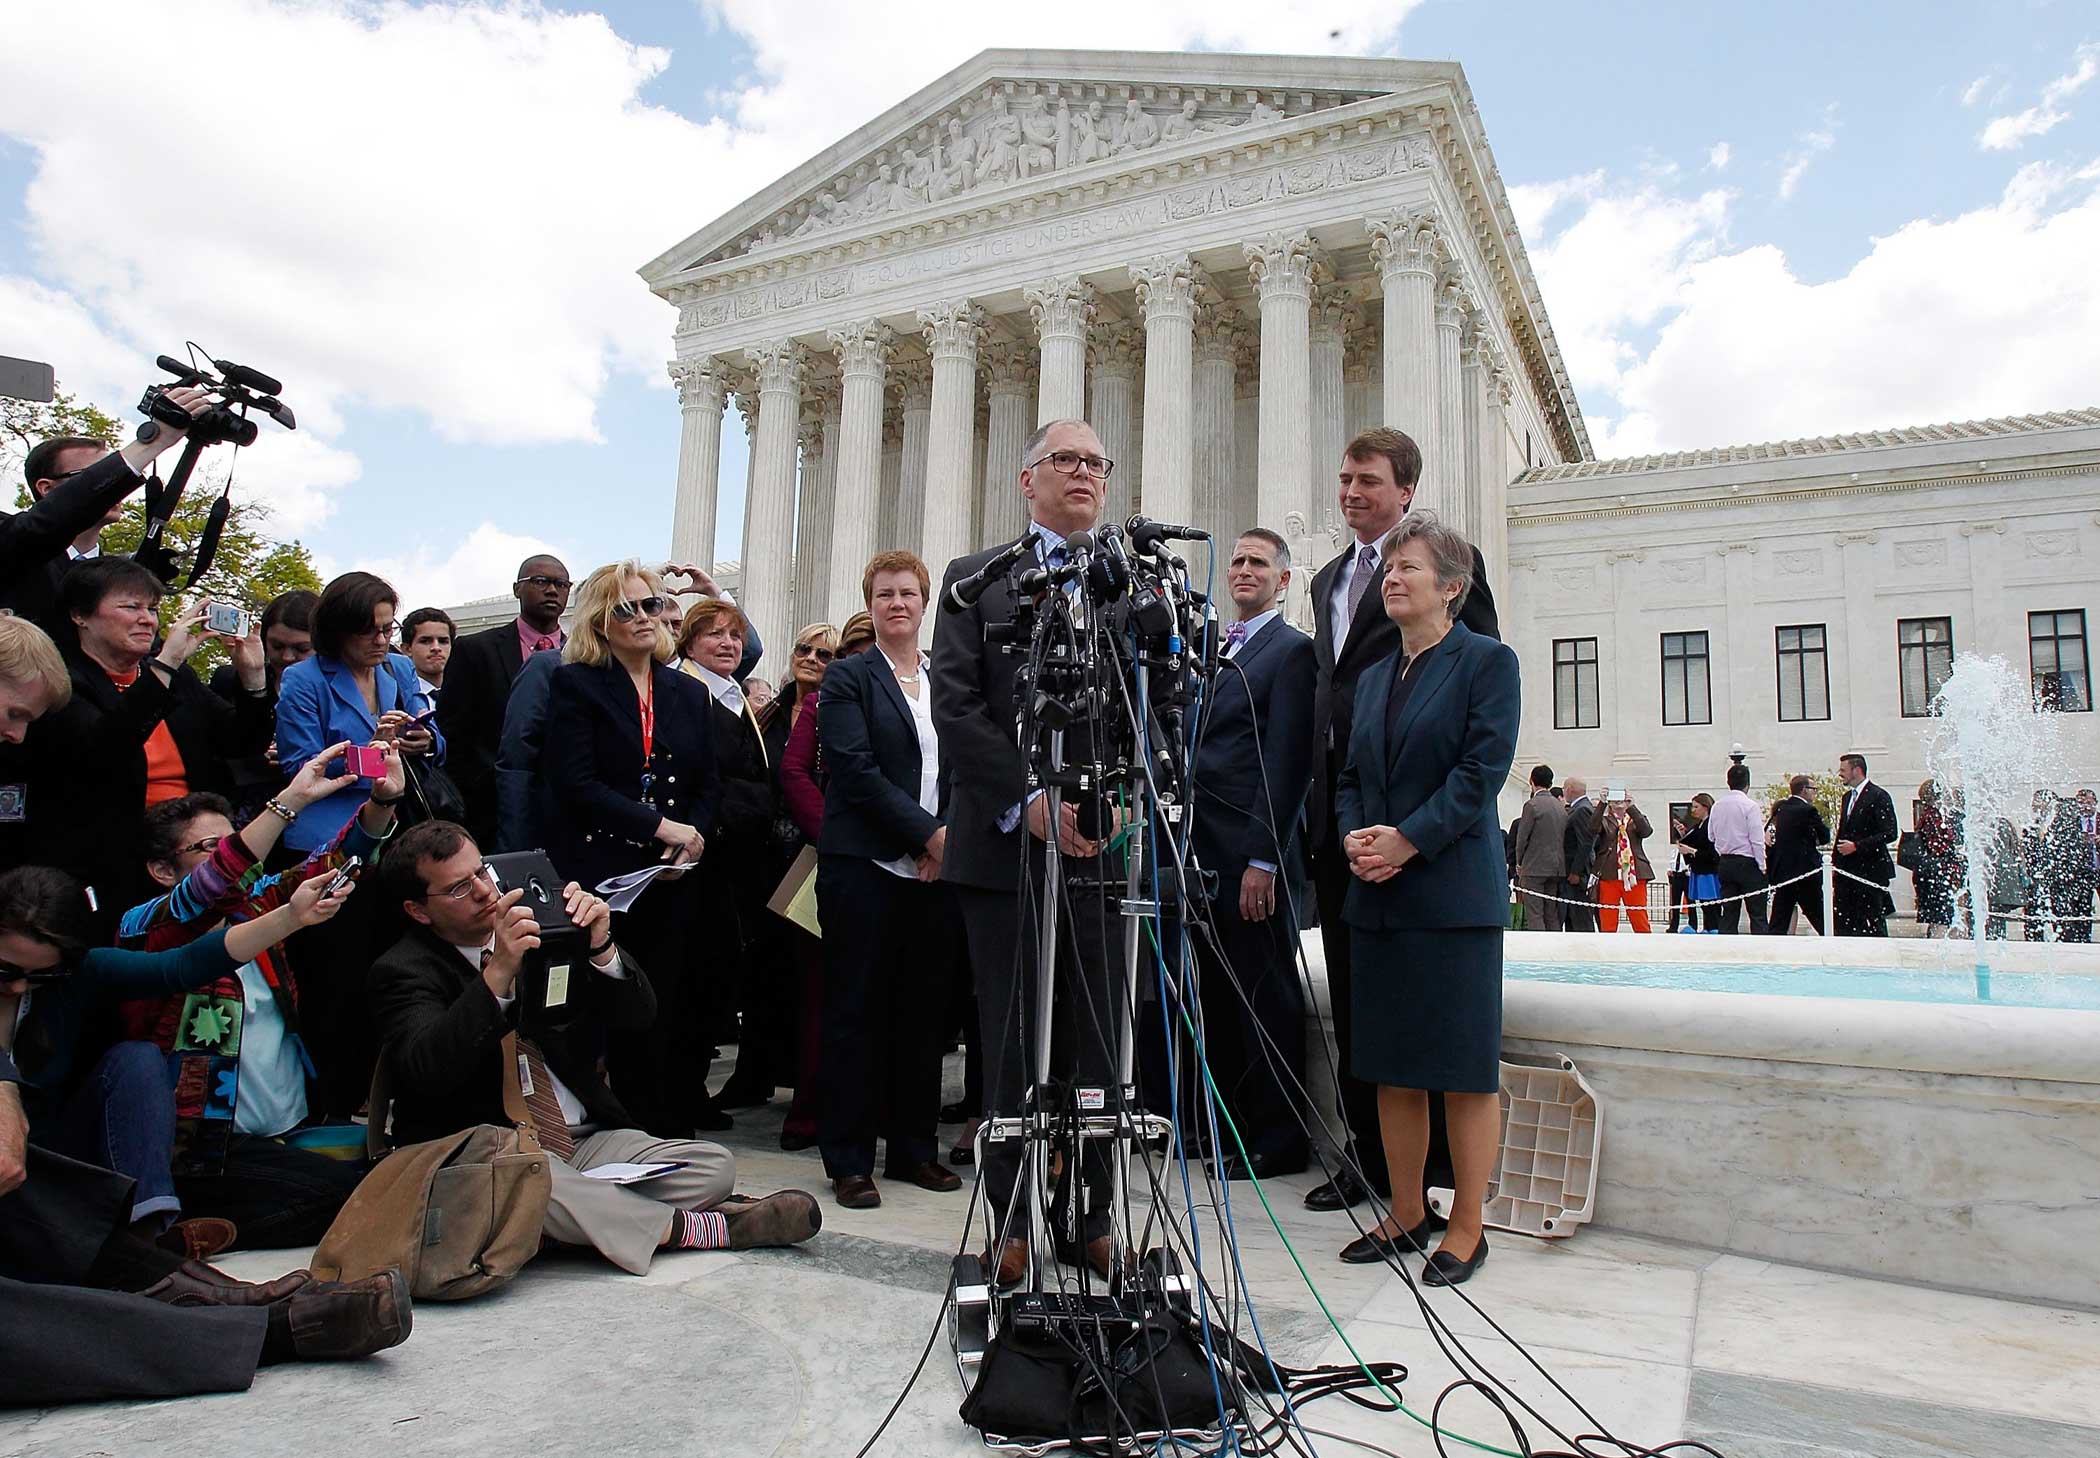 Jim Obergefell, the plaintiff in the marriage equality case, speaks outside of the  Supreme Court of the United States on April 28, 2015 in Washington. (Paul Morigi—Getty Images for HRC)